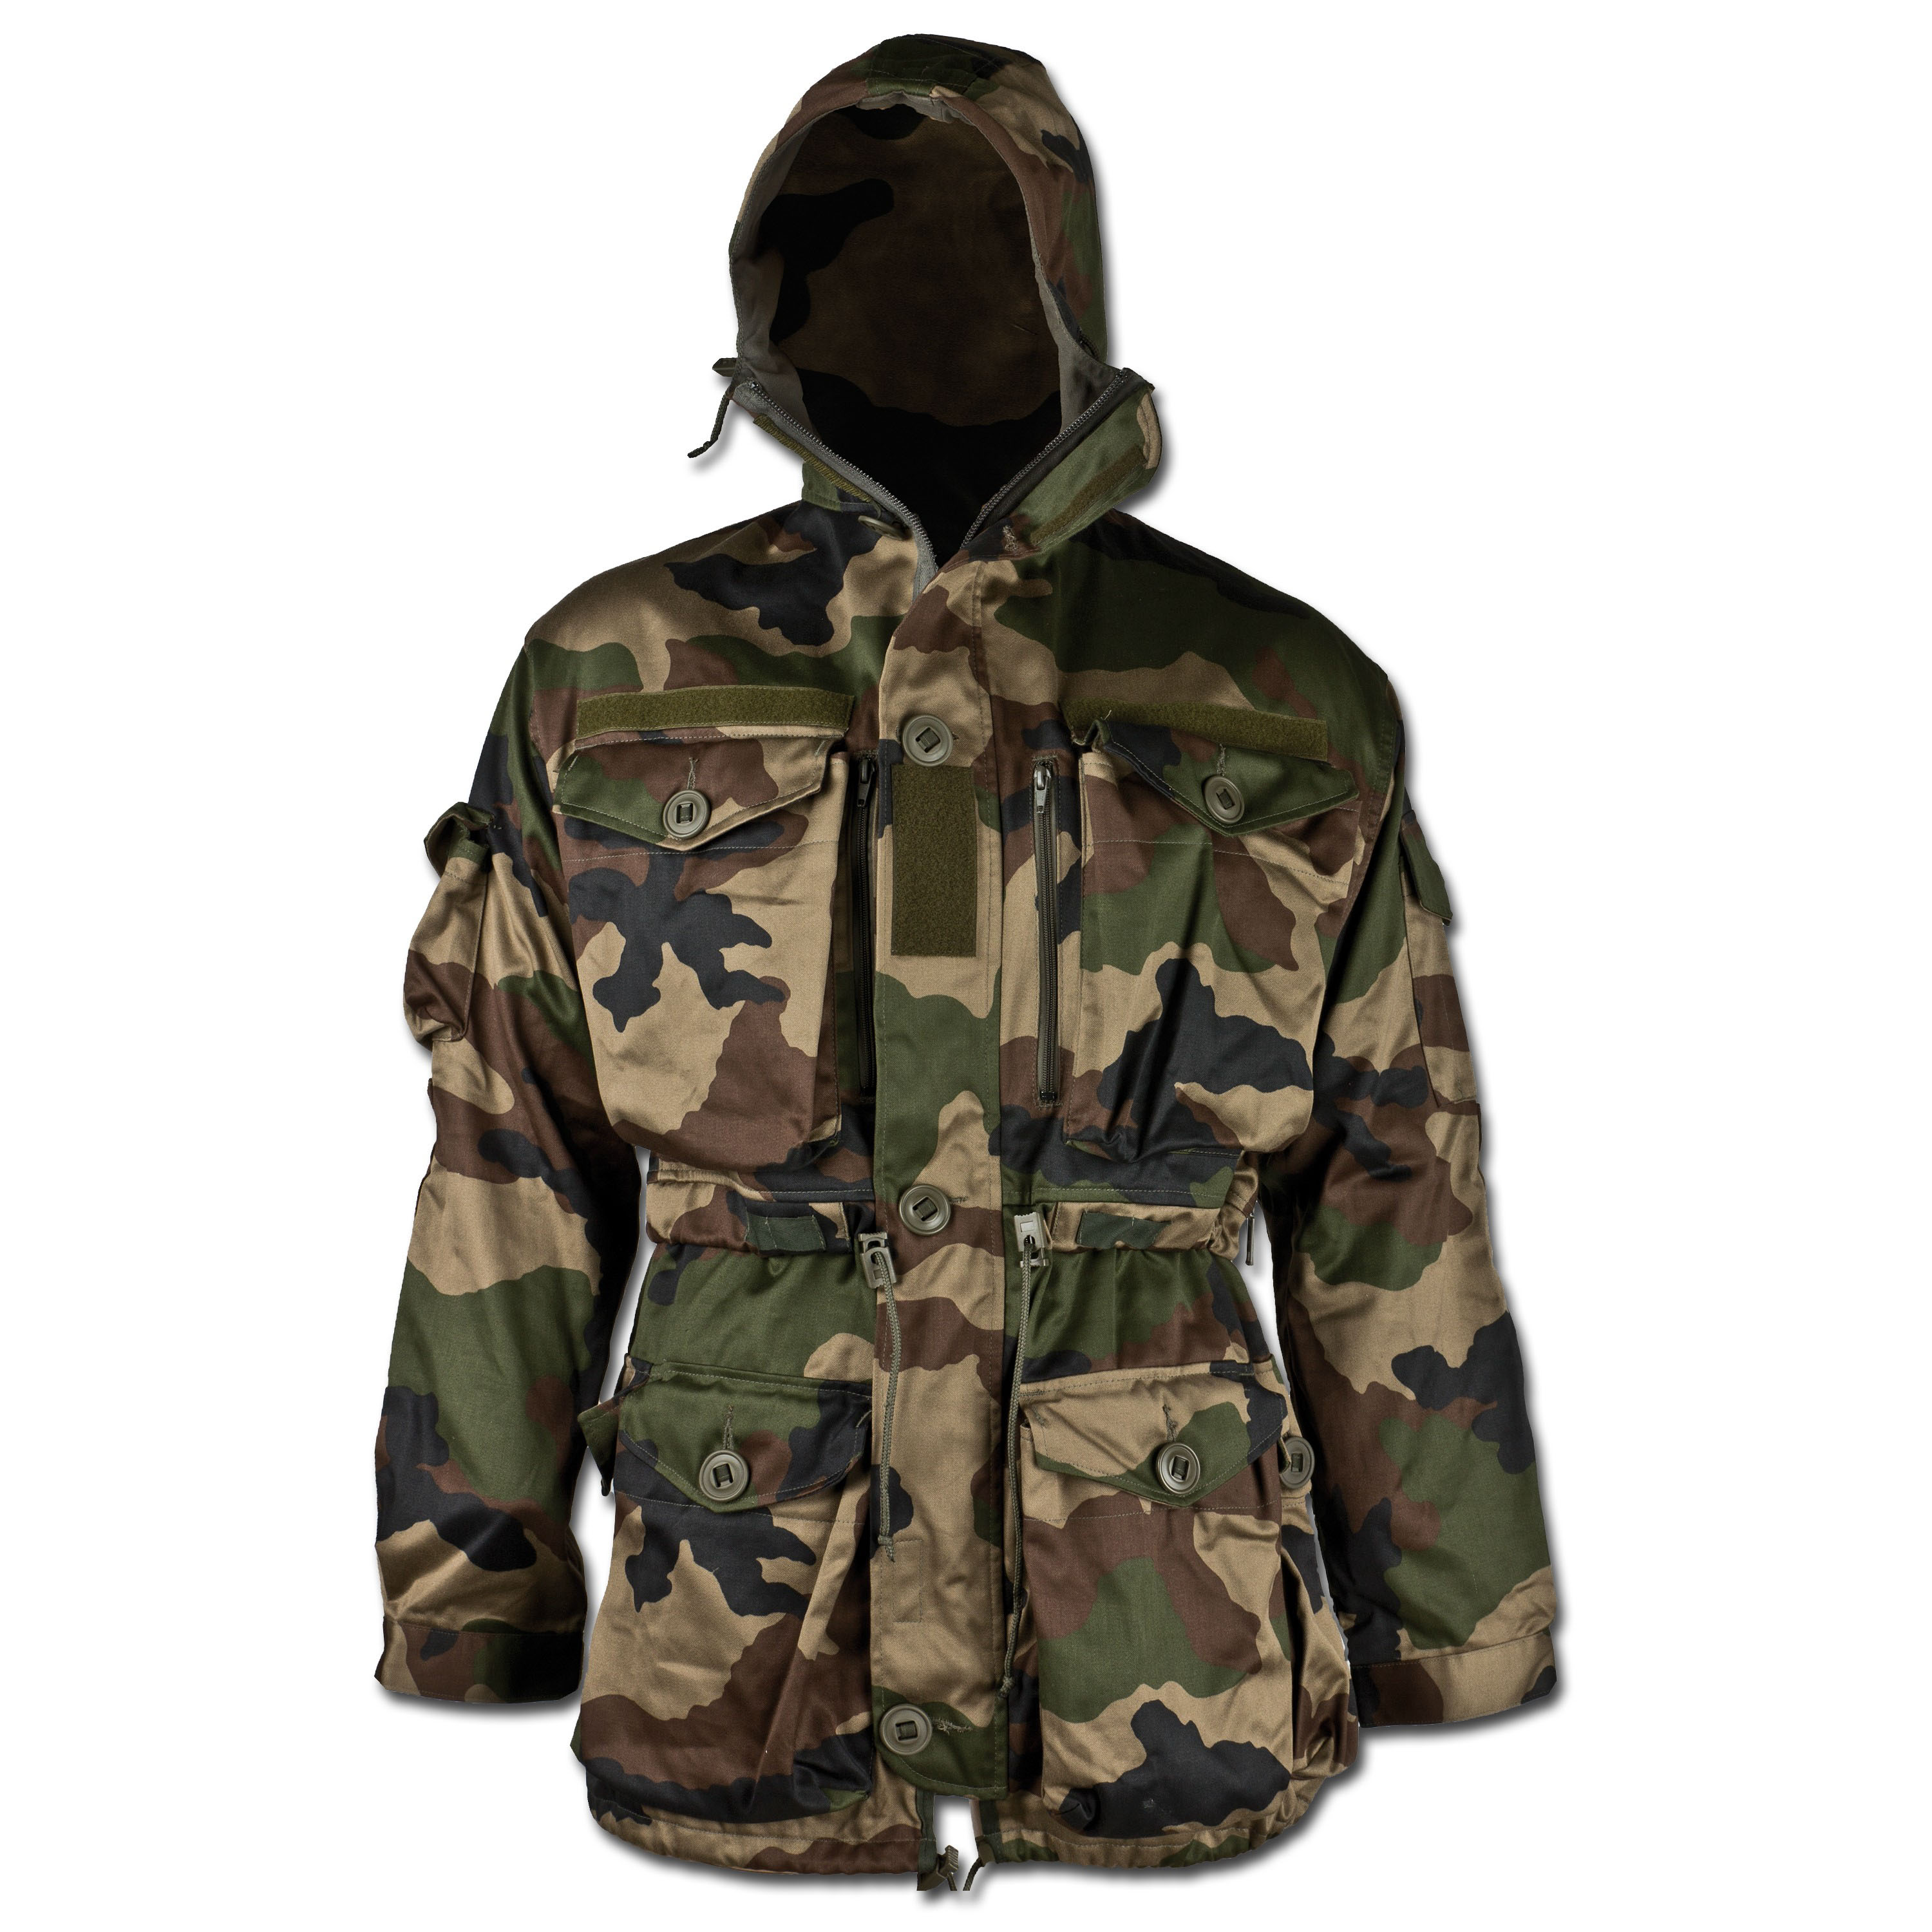 Purchase the Combat Smock KSK, CCE by ASMC